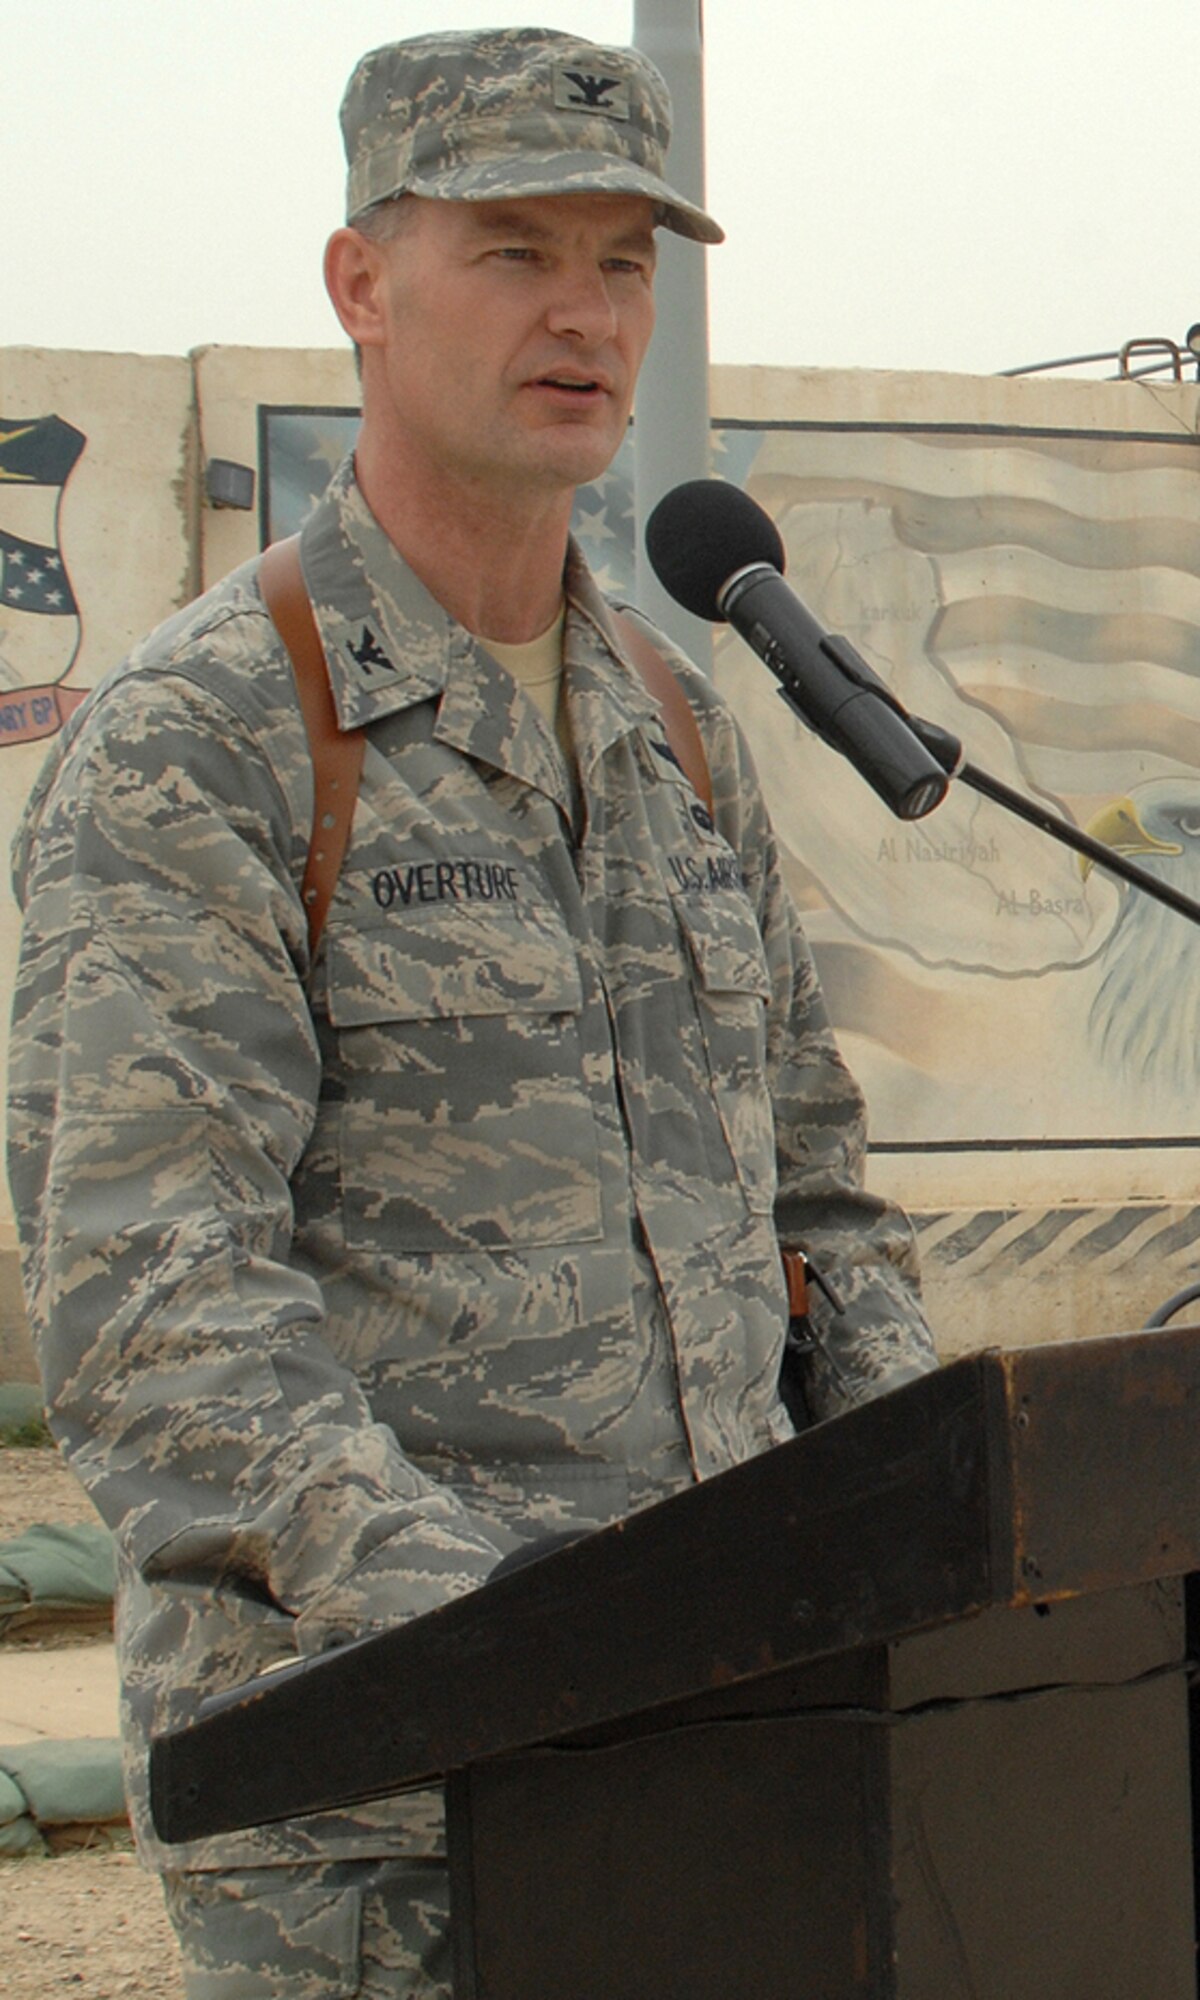 Col. Eric S. Overturf speaks to the men and women of the 506th Air Expeditionary Group at Kirkuk Regional Air Base, Iraq, after assuming command of the group April 30, 2009. Colonel Overturf is an Air Force reservist who commanded the 477th Fighter Group, an F-22 classic associate unit, at Elmendorf Air Force Base, Alaska, before deploying to Iraq. (U.S. Air Force photo/Staff Sgt. Eunique Stevens)